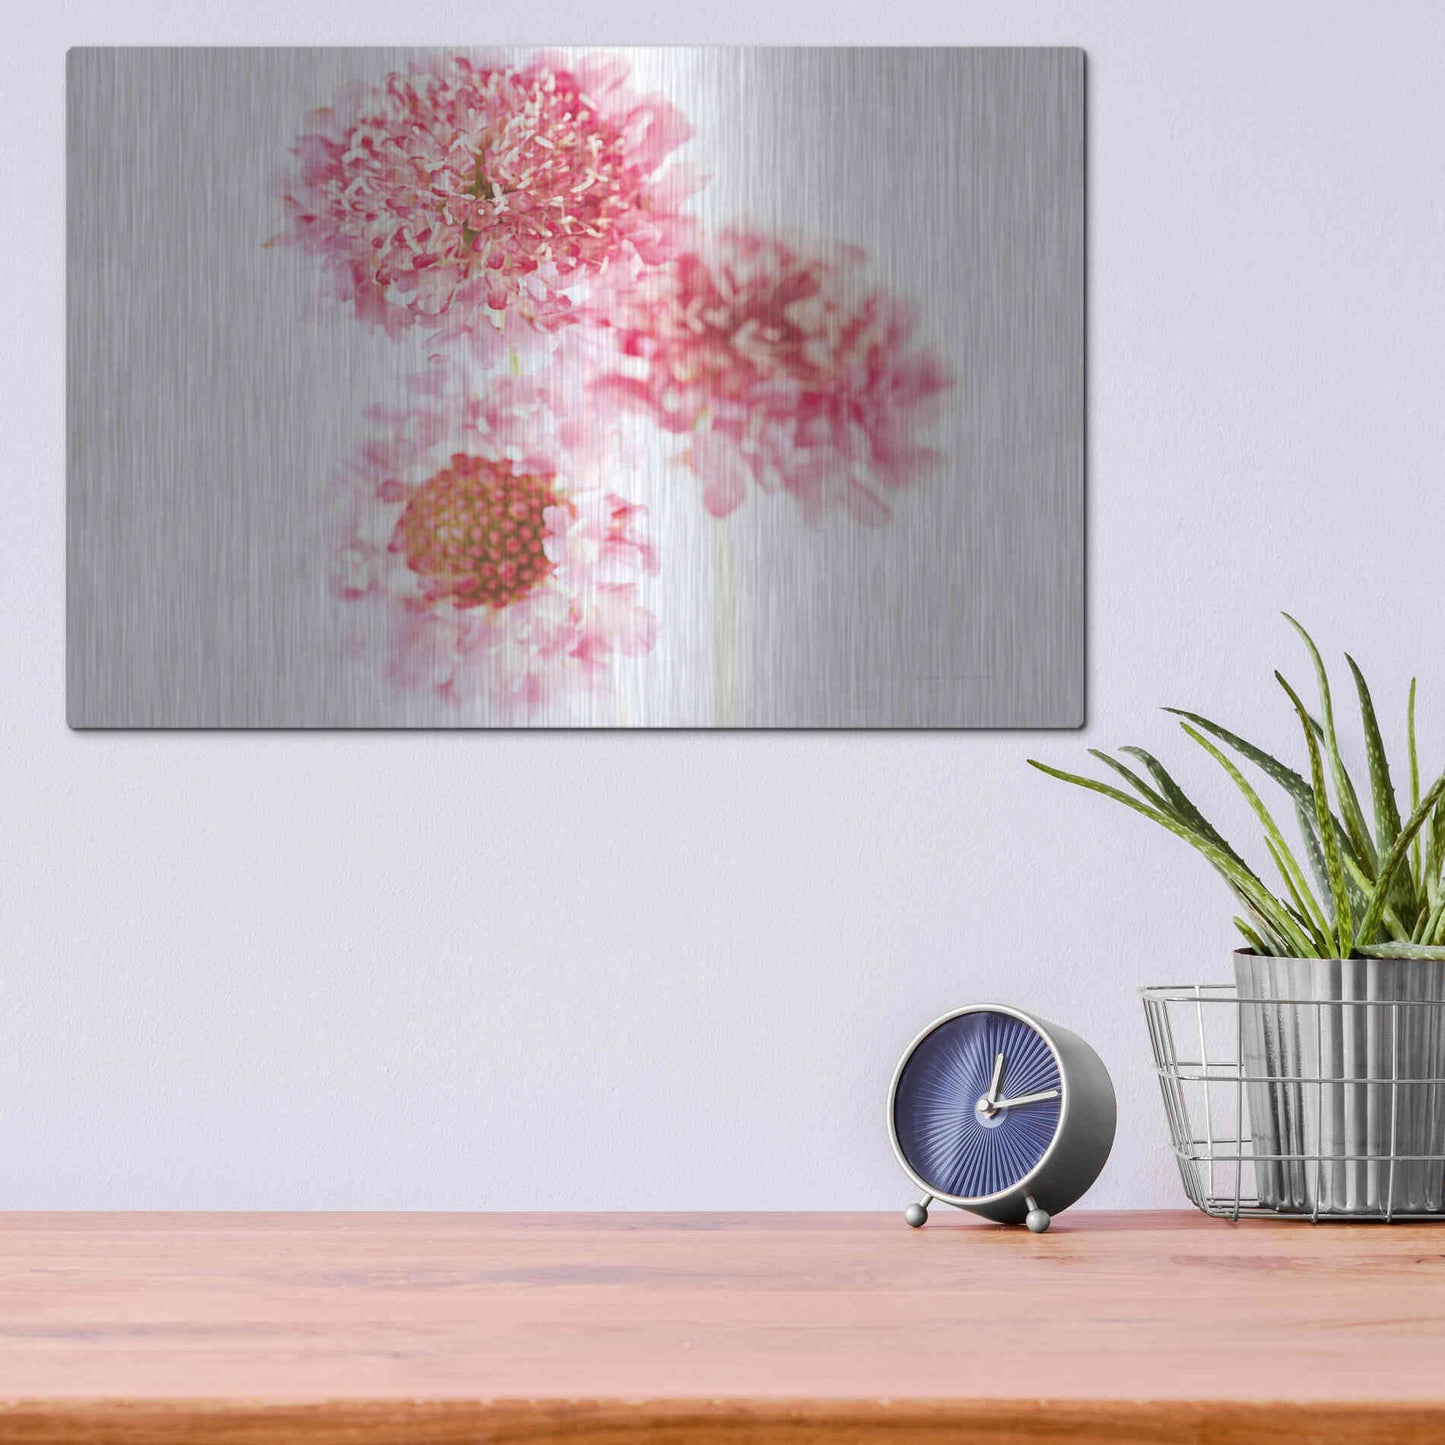 Luxe Metal Art 'Pink Scabiosa Trio' by Elise Catterall, Metal Wall Art,16x12